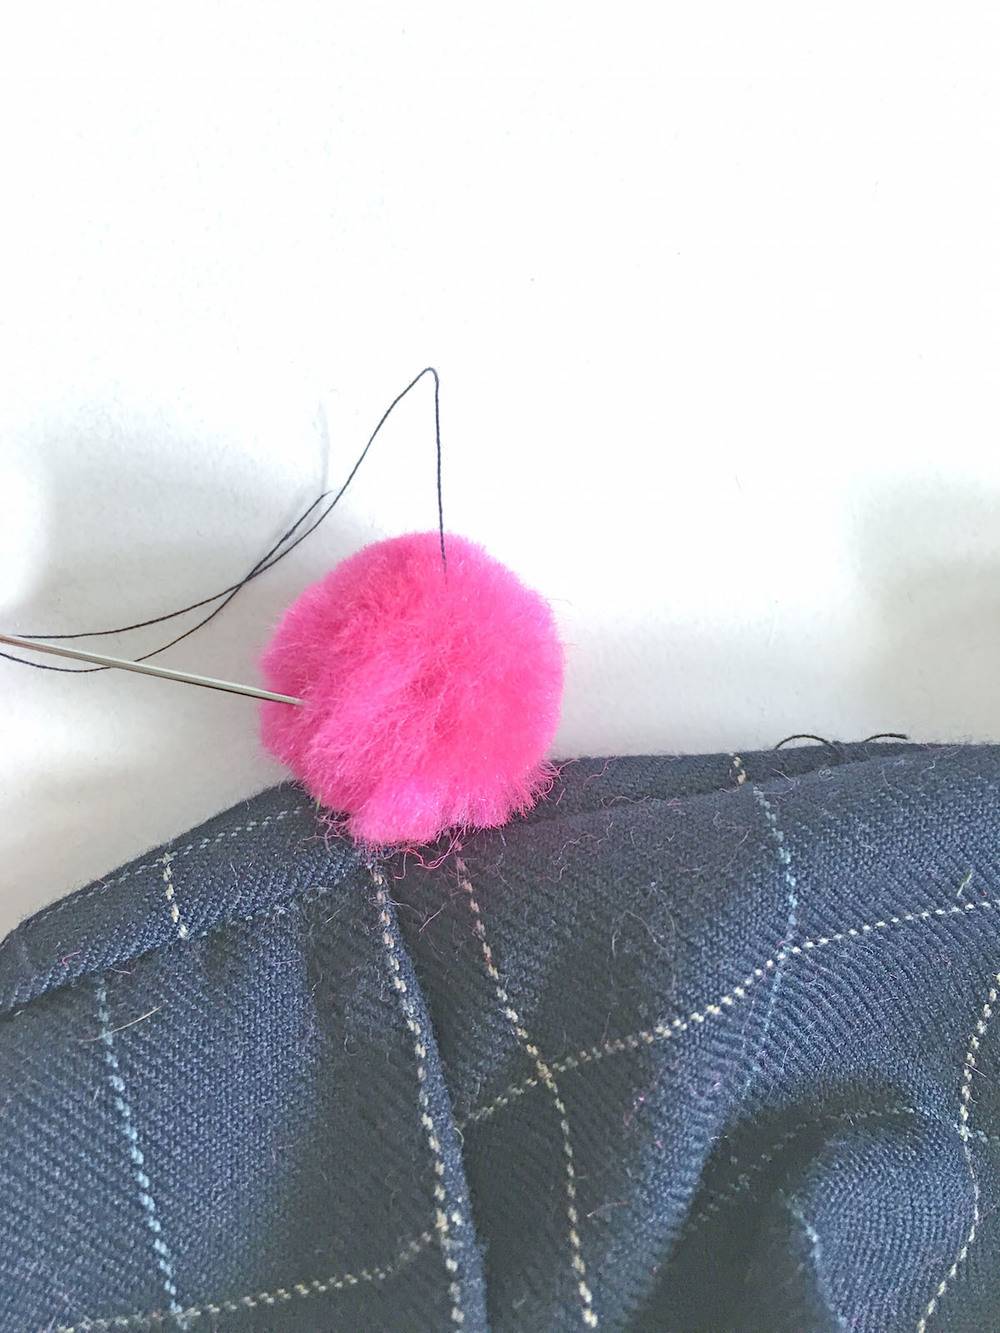 Pink wool with knitting needle and thread on the cloth.